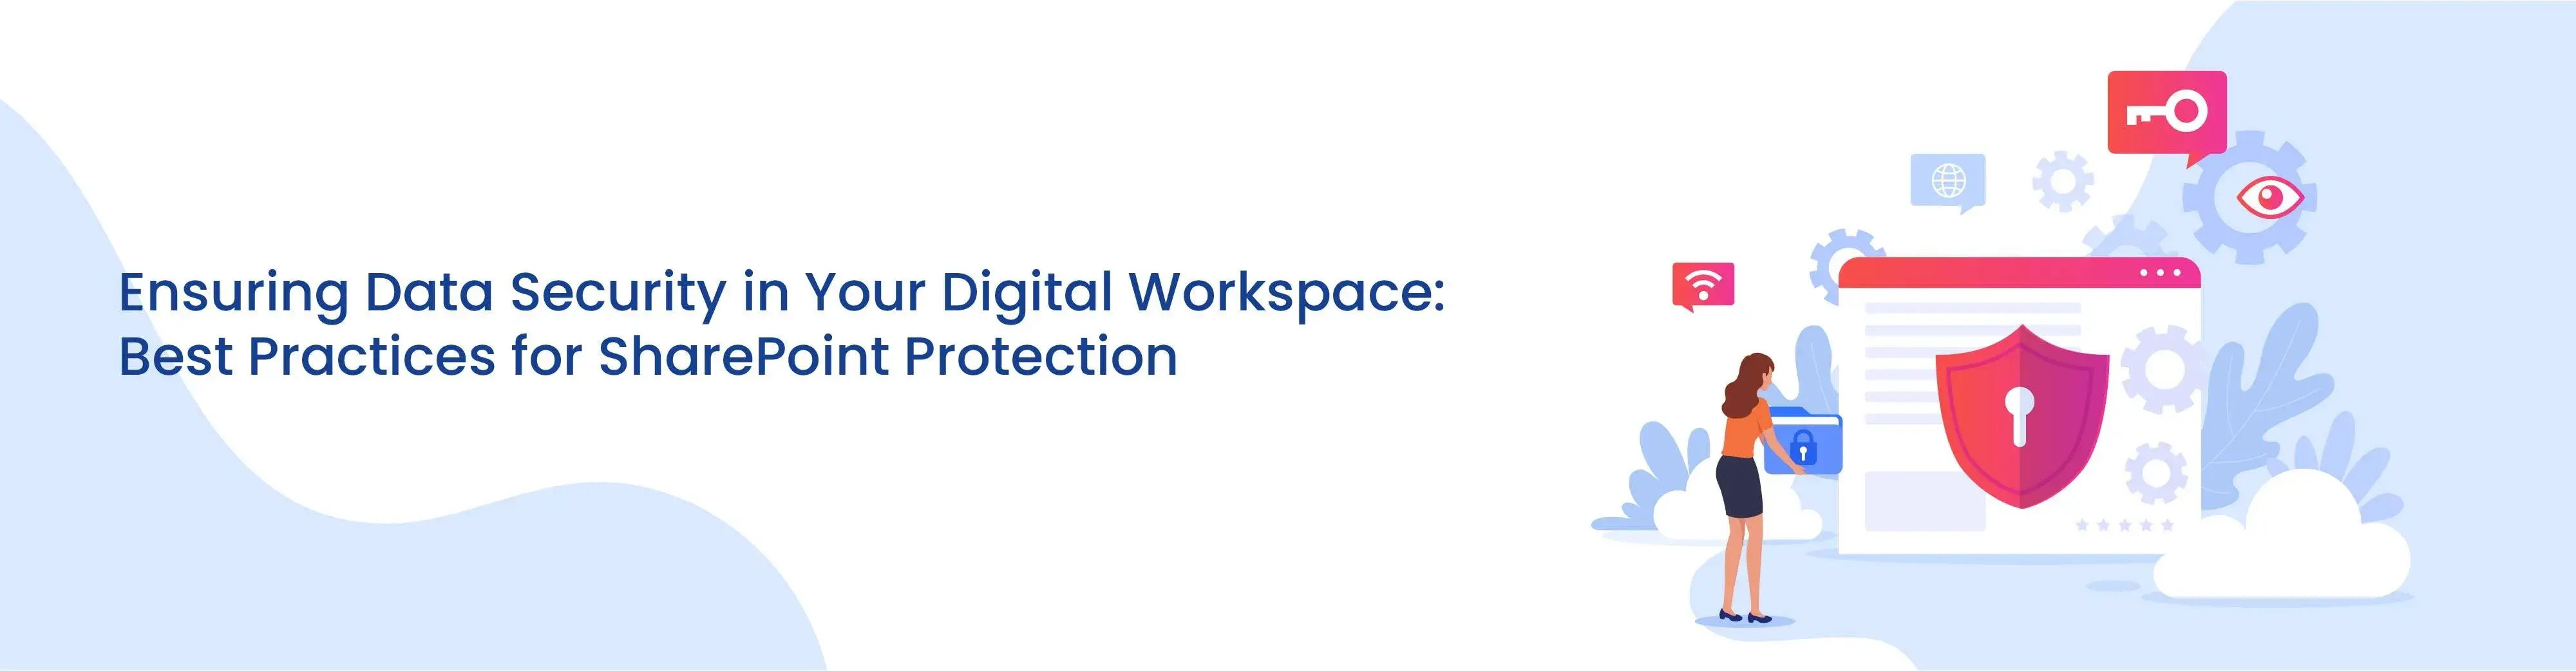 Ensuring Data Security in Your Digital Workspace: Best Practices for SharePoint Protection